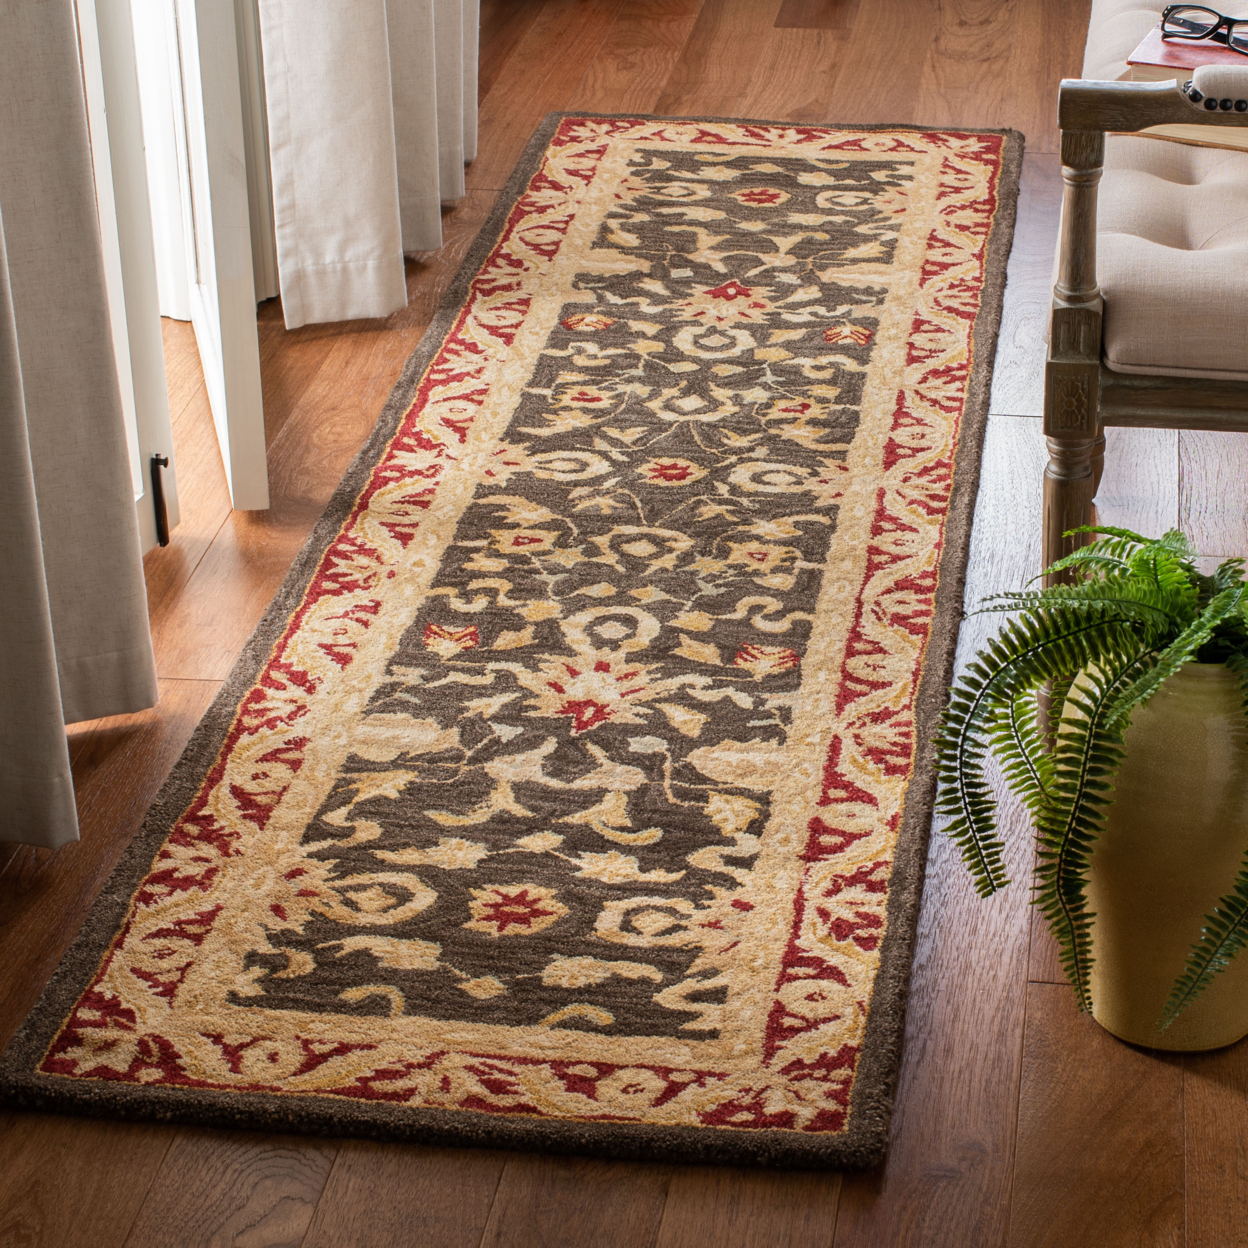 Safavieh Anatolia Spencer Traditional Wool Runner Rug, Charcoal/Red, 2'3" x 10' - image 3 of 10